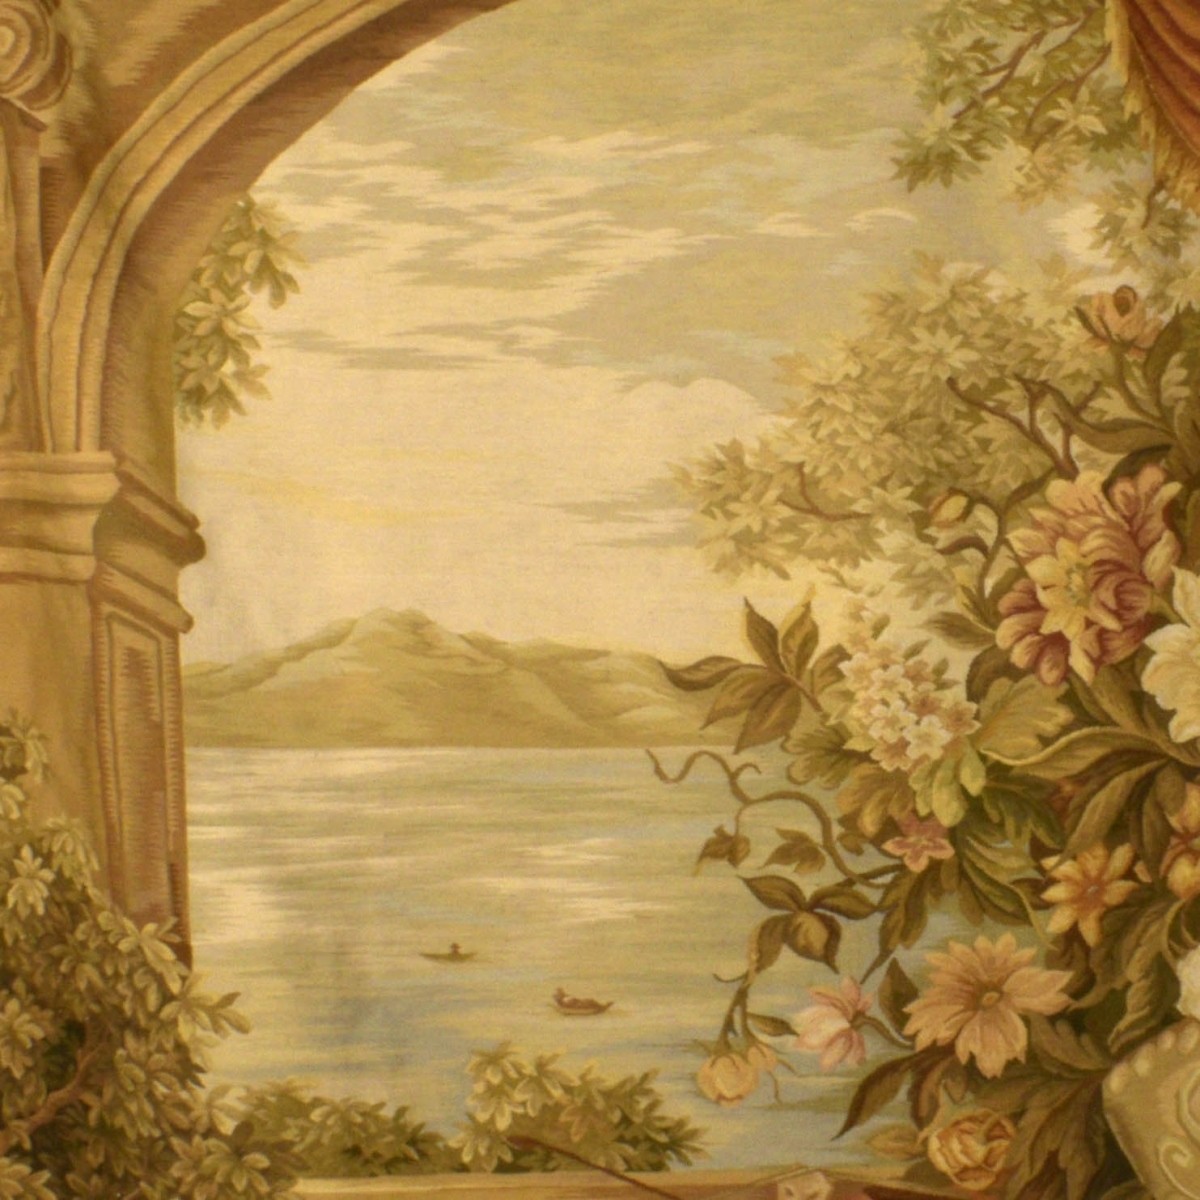 Aubusson Style Wall Hanging Tapestry.